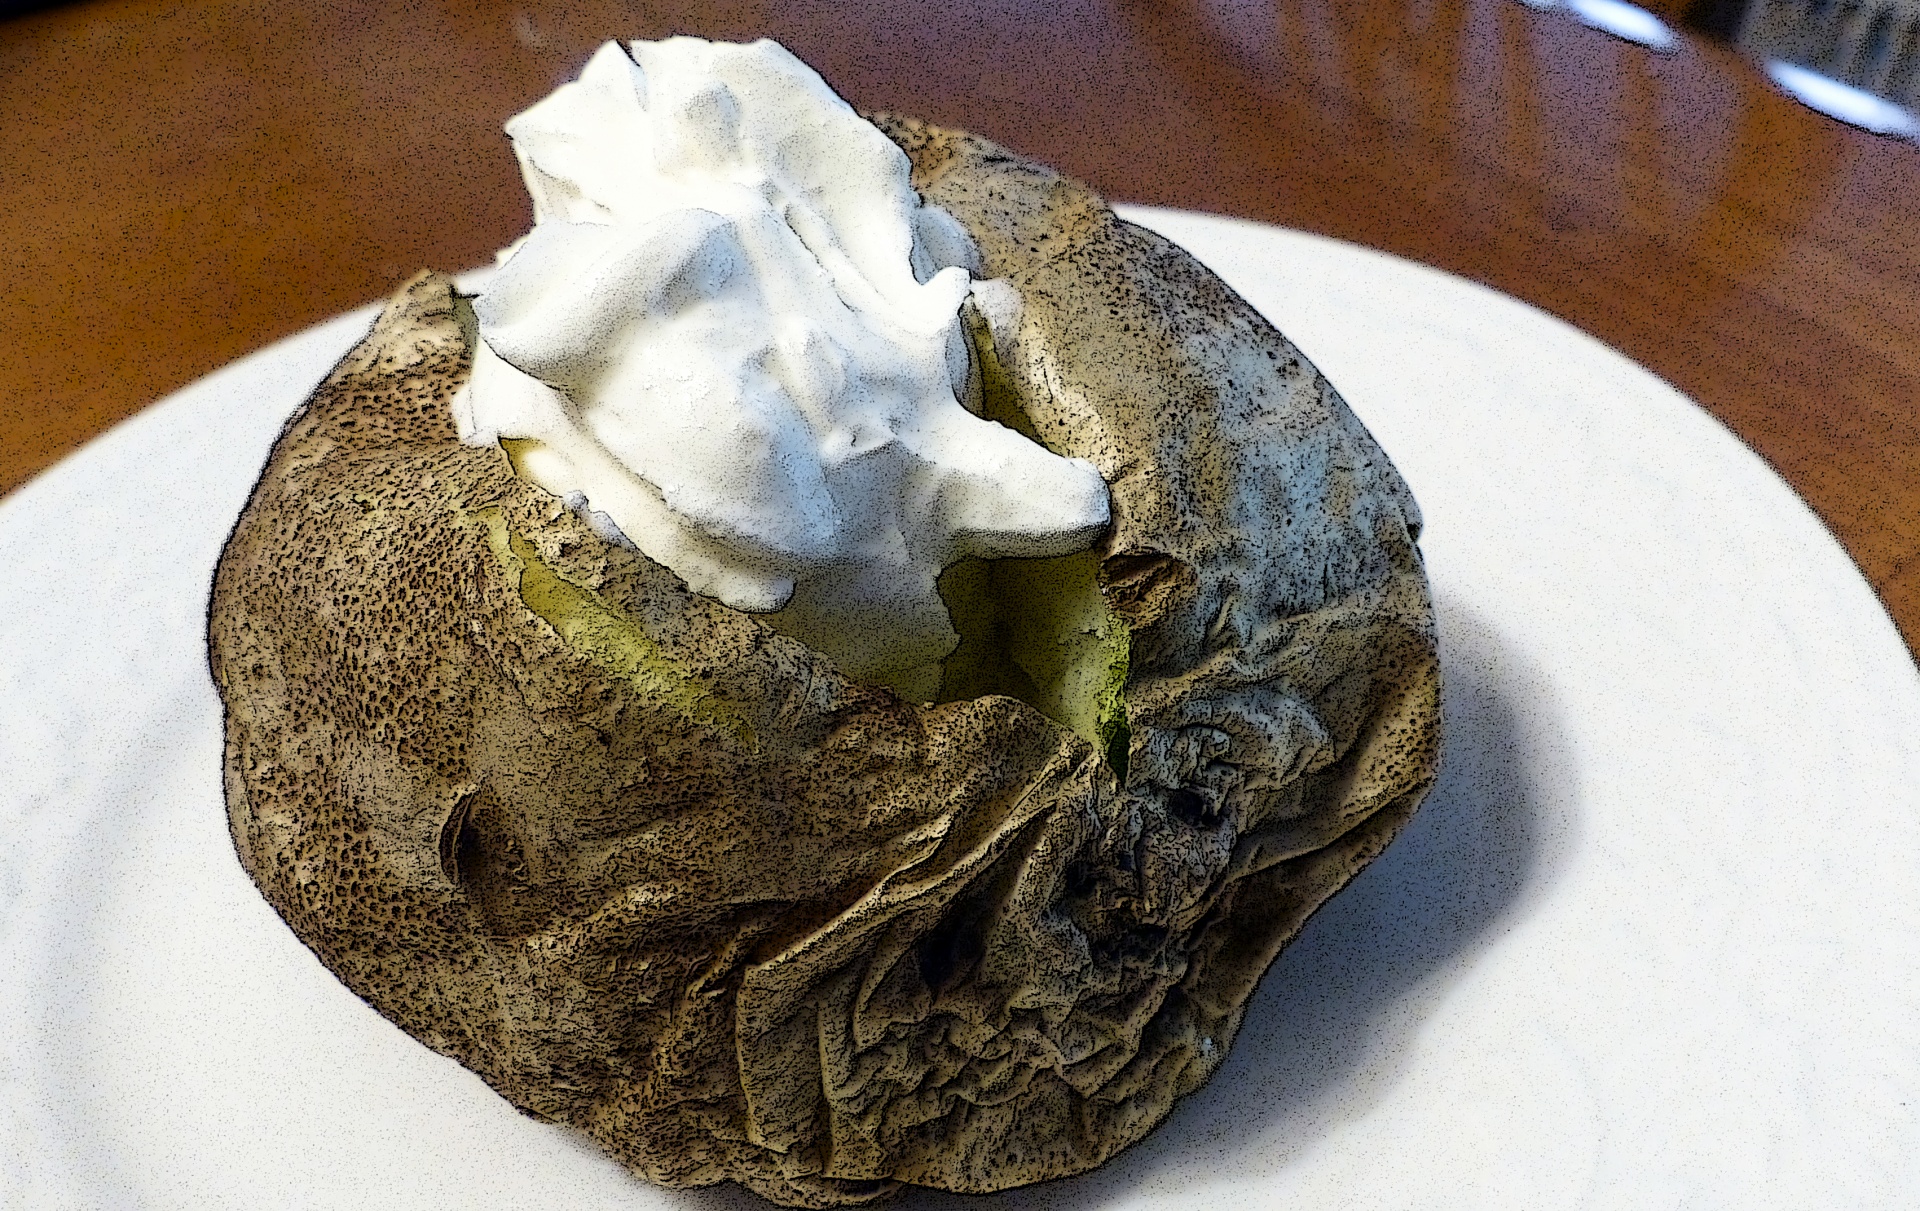 Baked potato and sour cream on a white plate